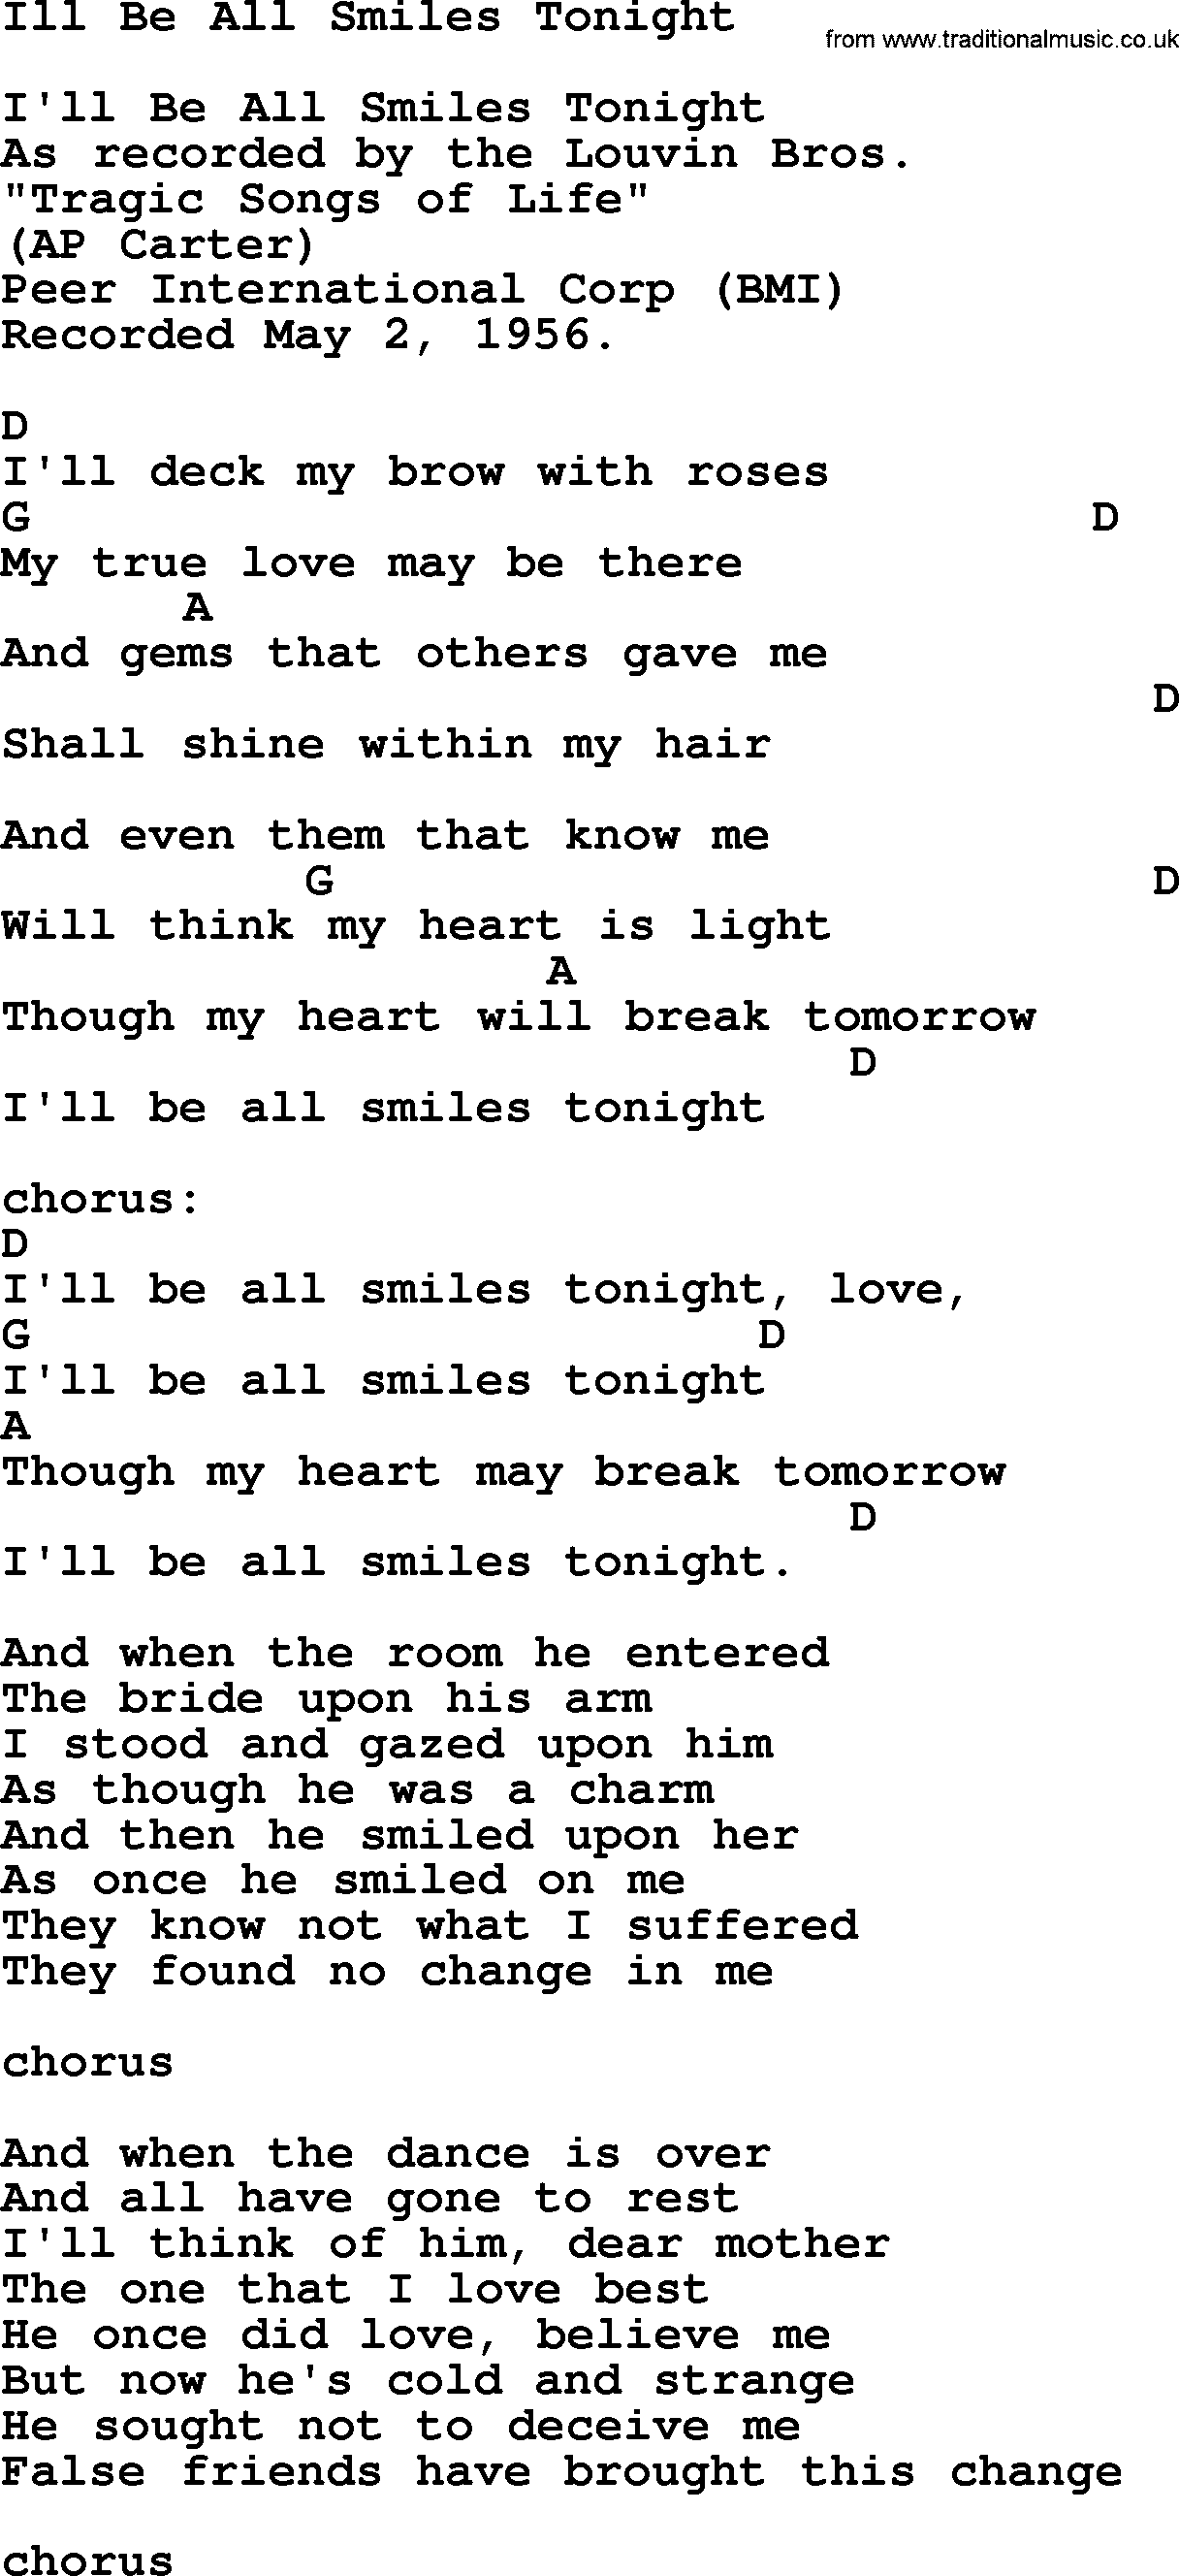 Bluegrass song: Ill Be All Smiles Tonight, lyrics and chords